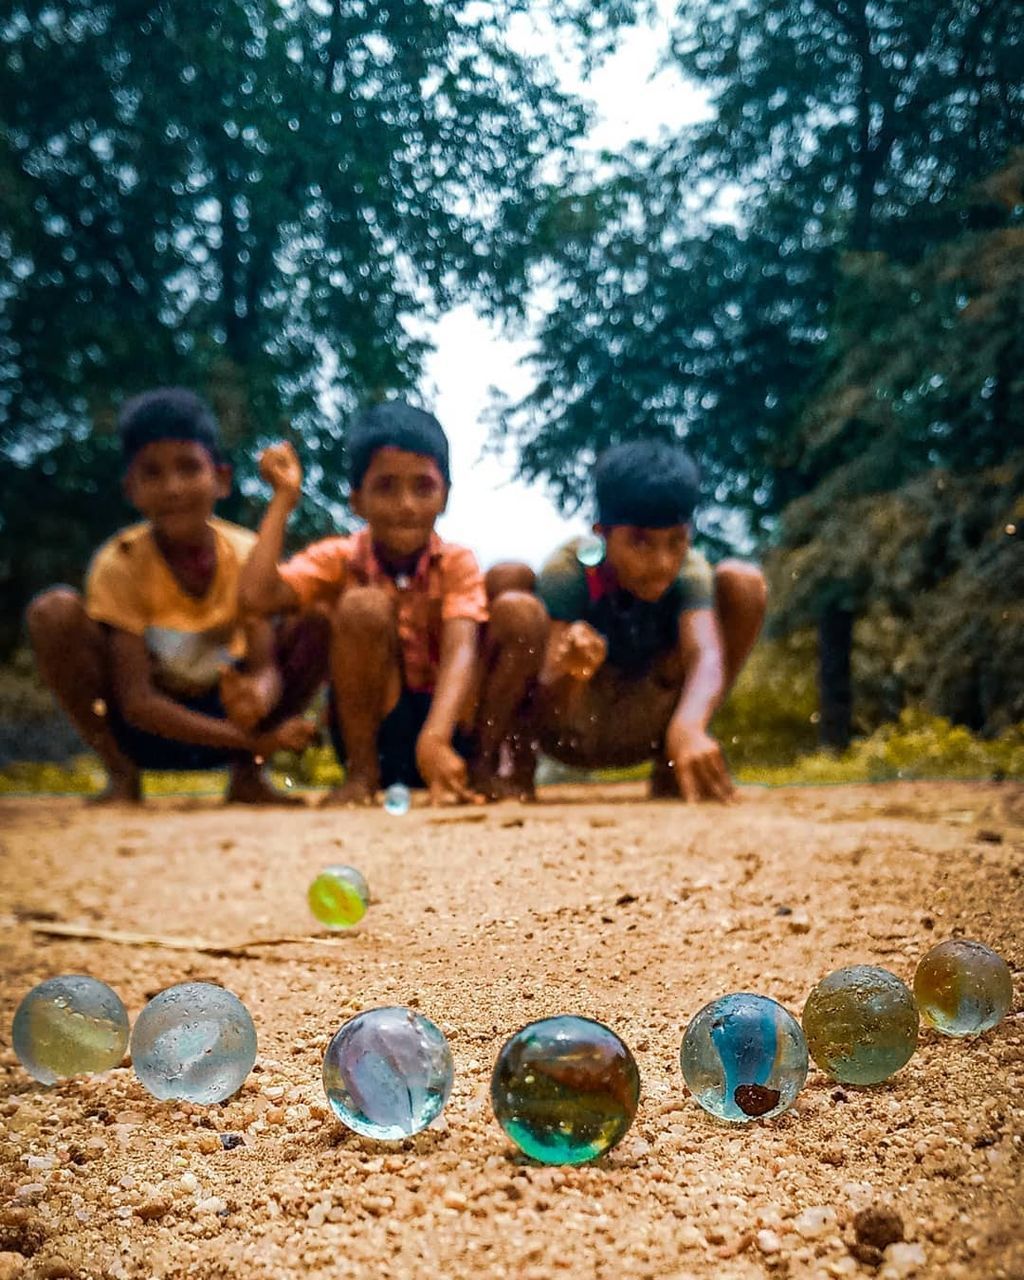 GROUP OF PEOPLE PLAYING WITH BALL ON GROUND